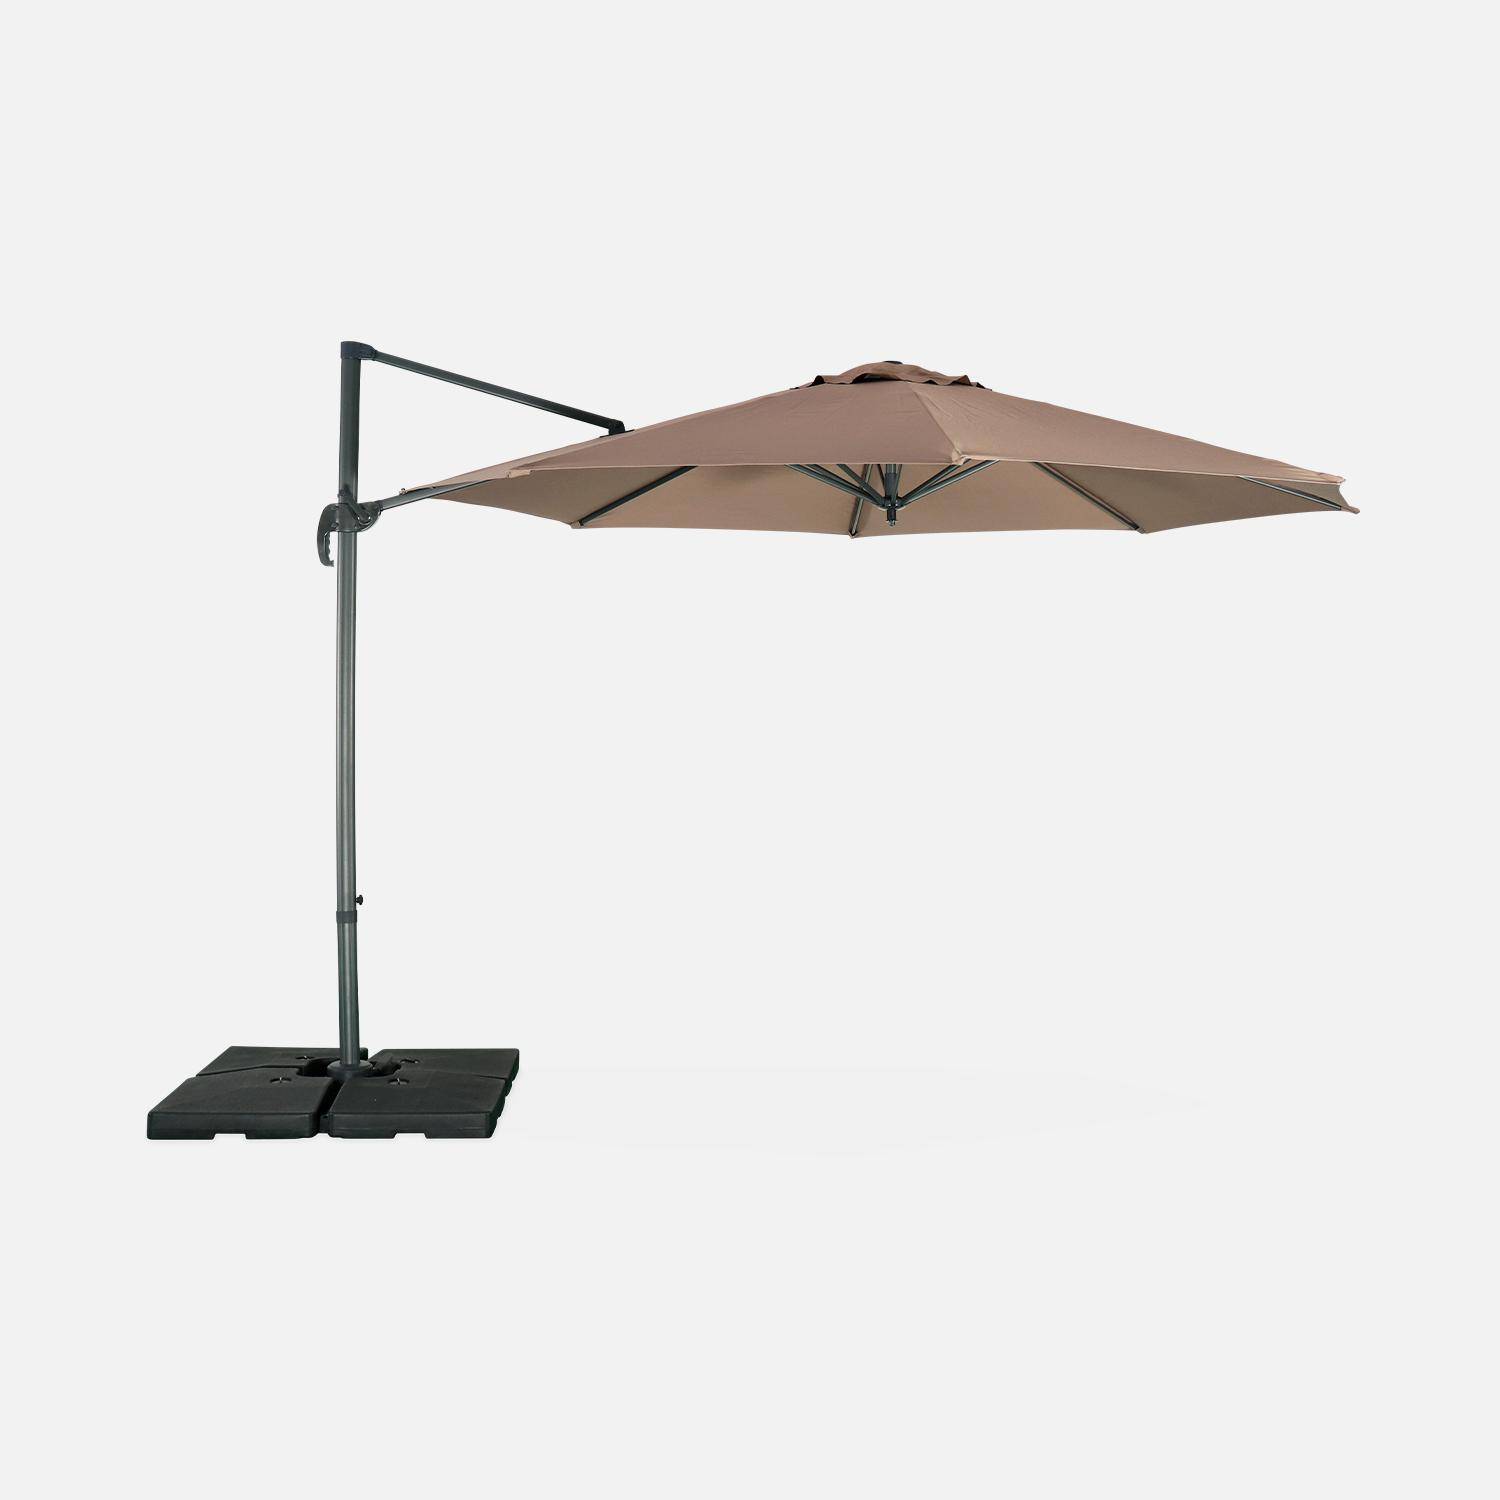 Parasol Ø350cm - parasol that can be tilted, folded and 360° rotation - Antibes - Beige-brown Photo5